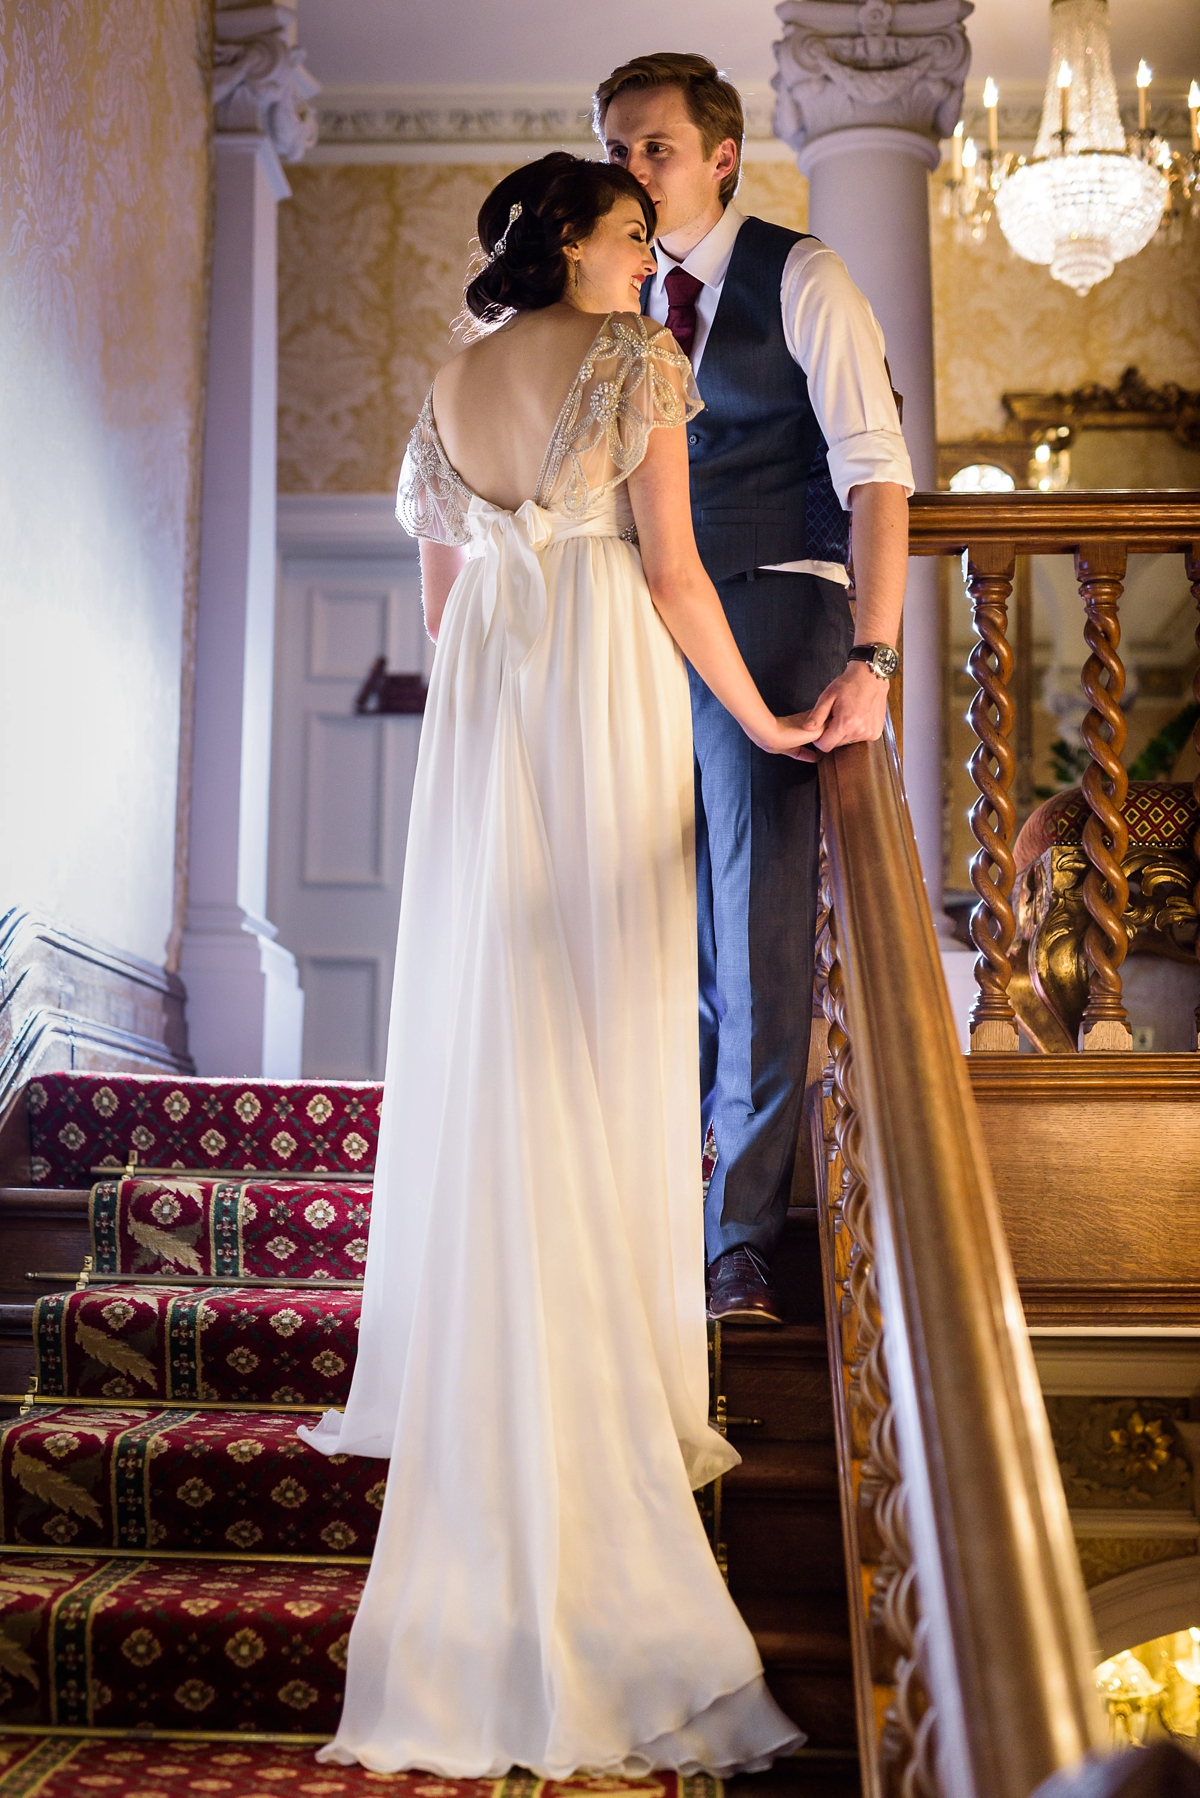 61 An Anna Campbell gown for a countryhouse wedding filled with a speakeasy vibe. Images by Su Ann Simon